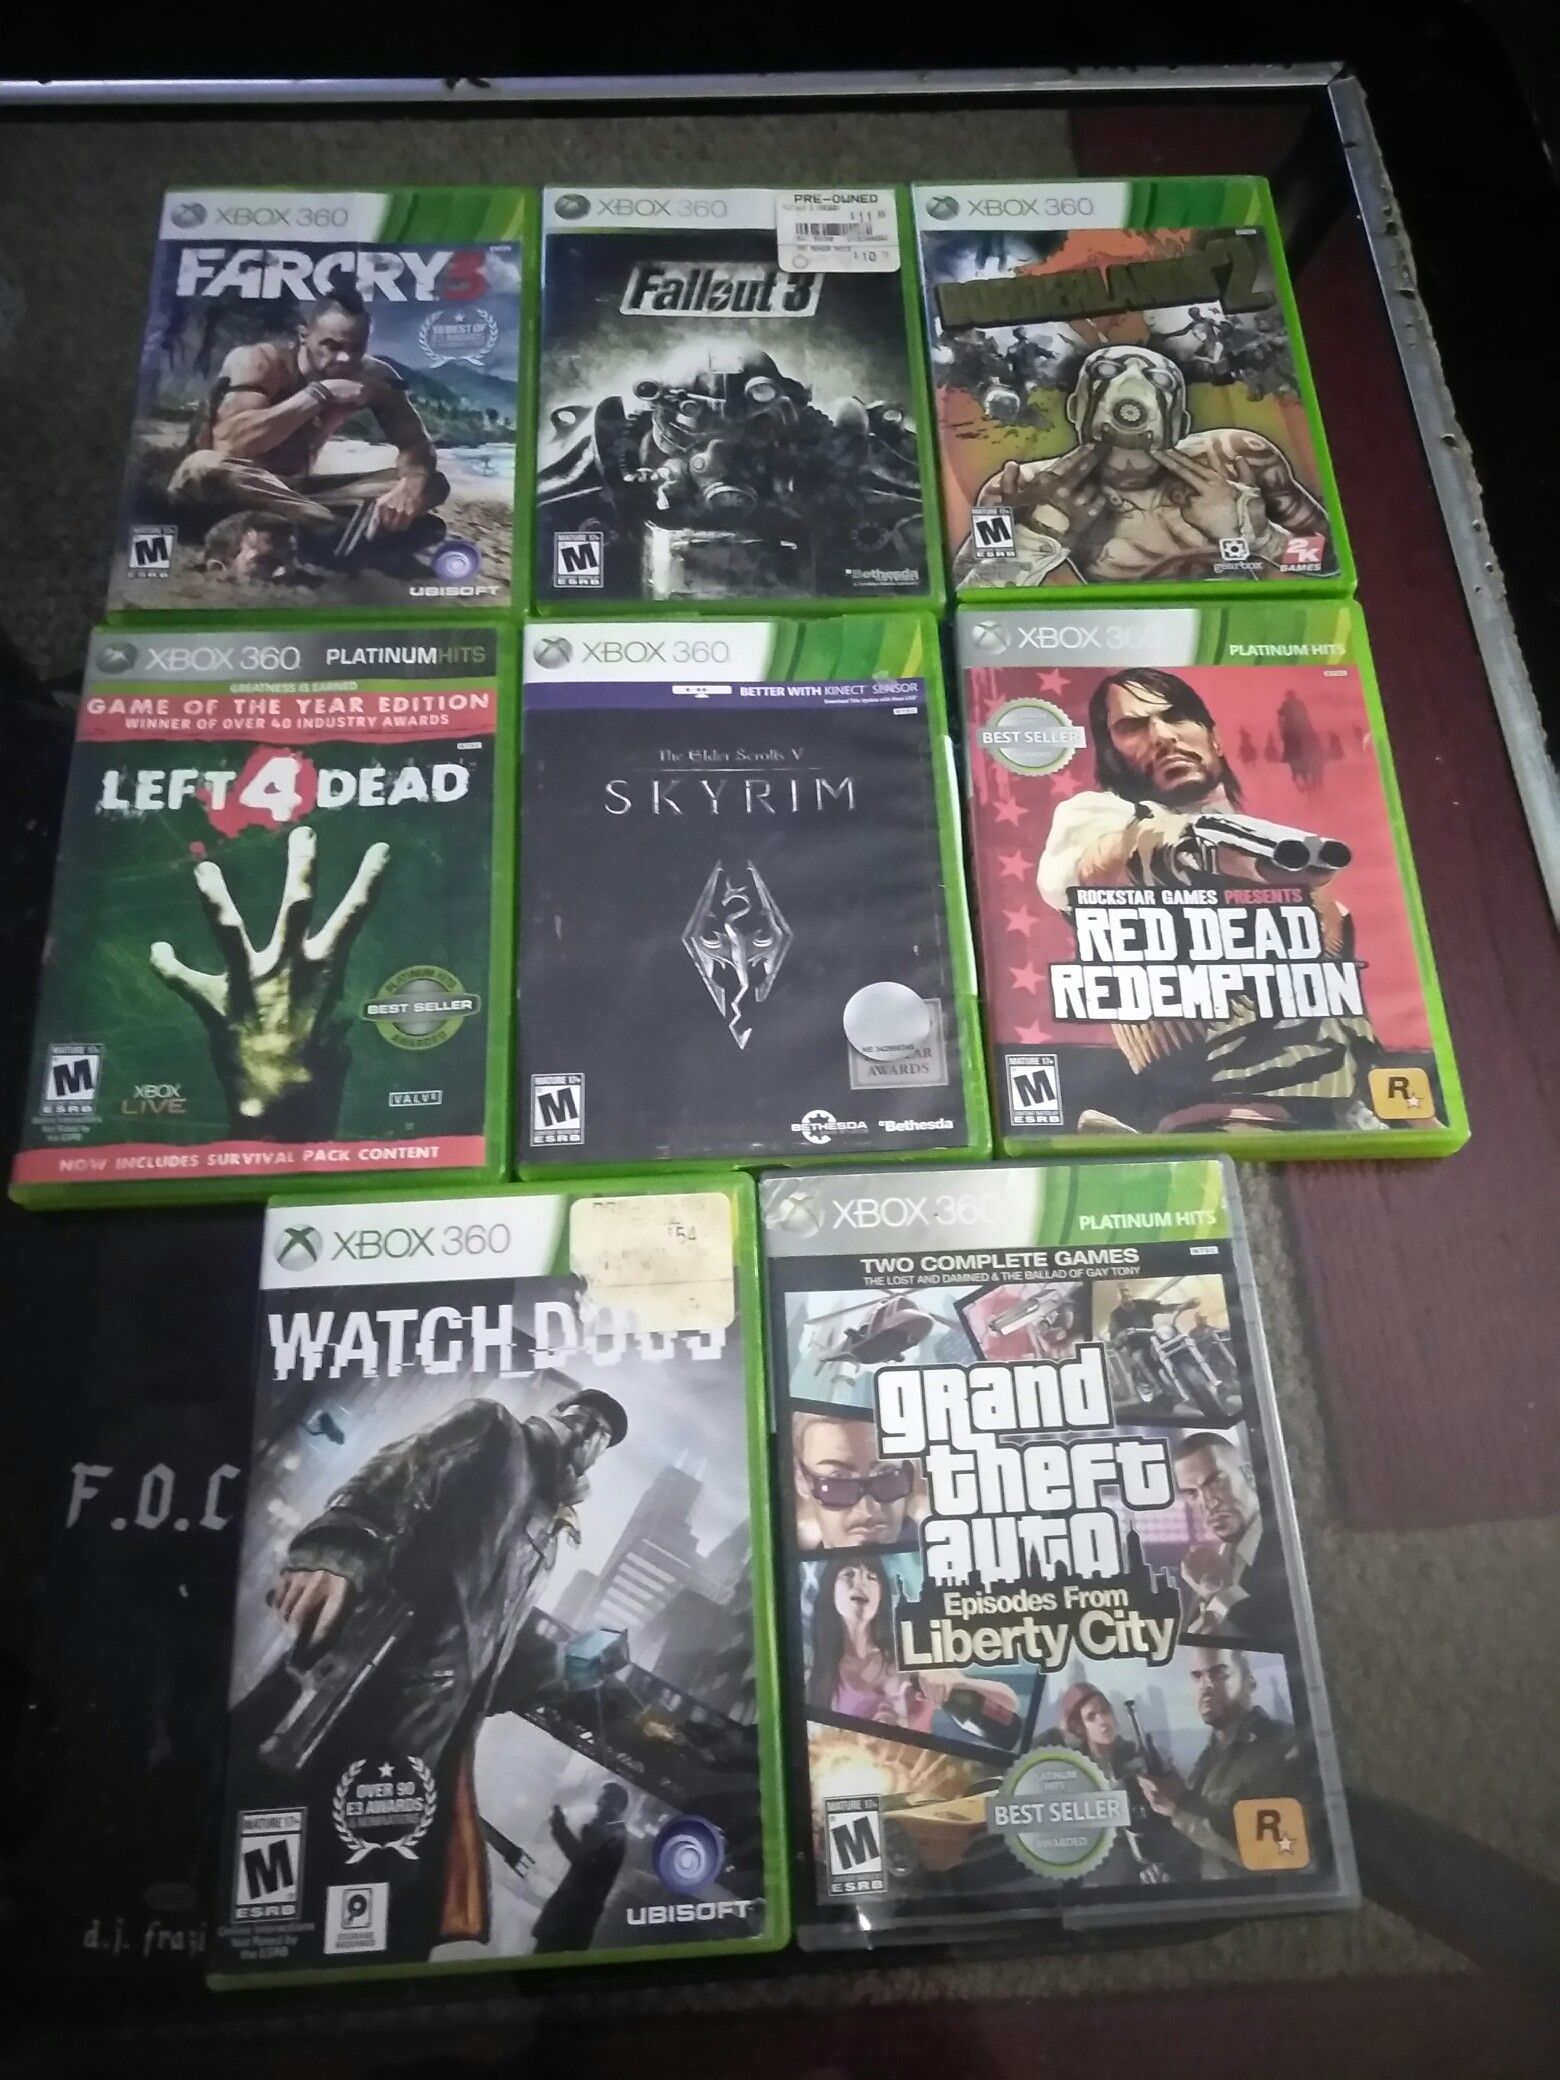 Xbox 360 games & PS4 NBA 2K16 for sale only